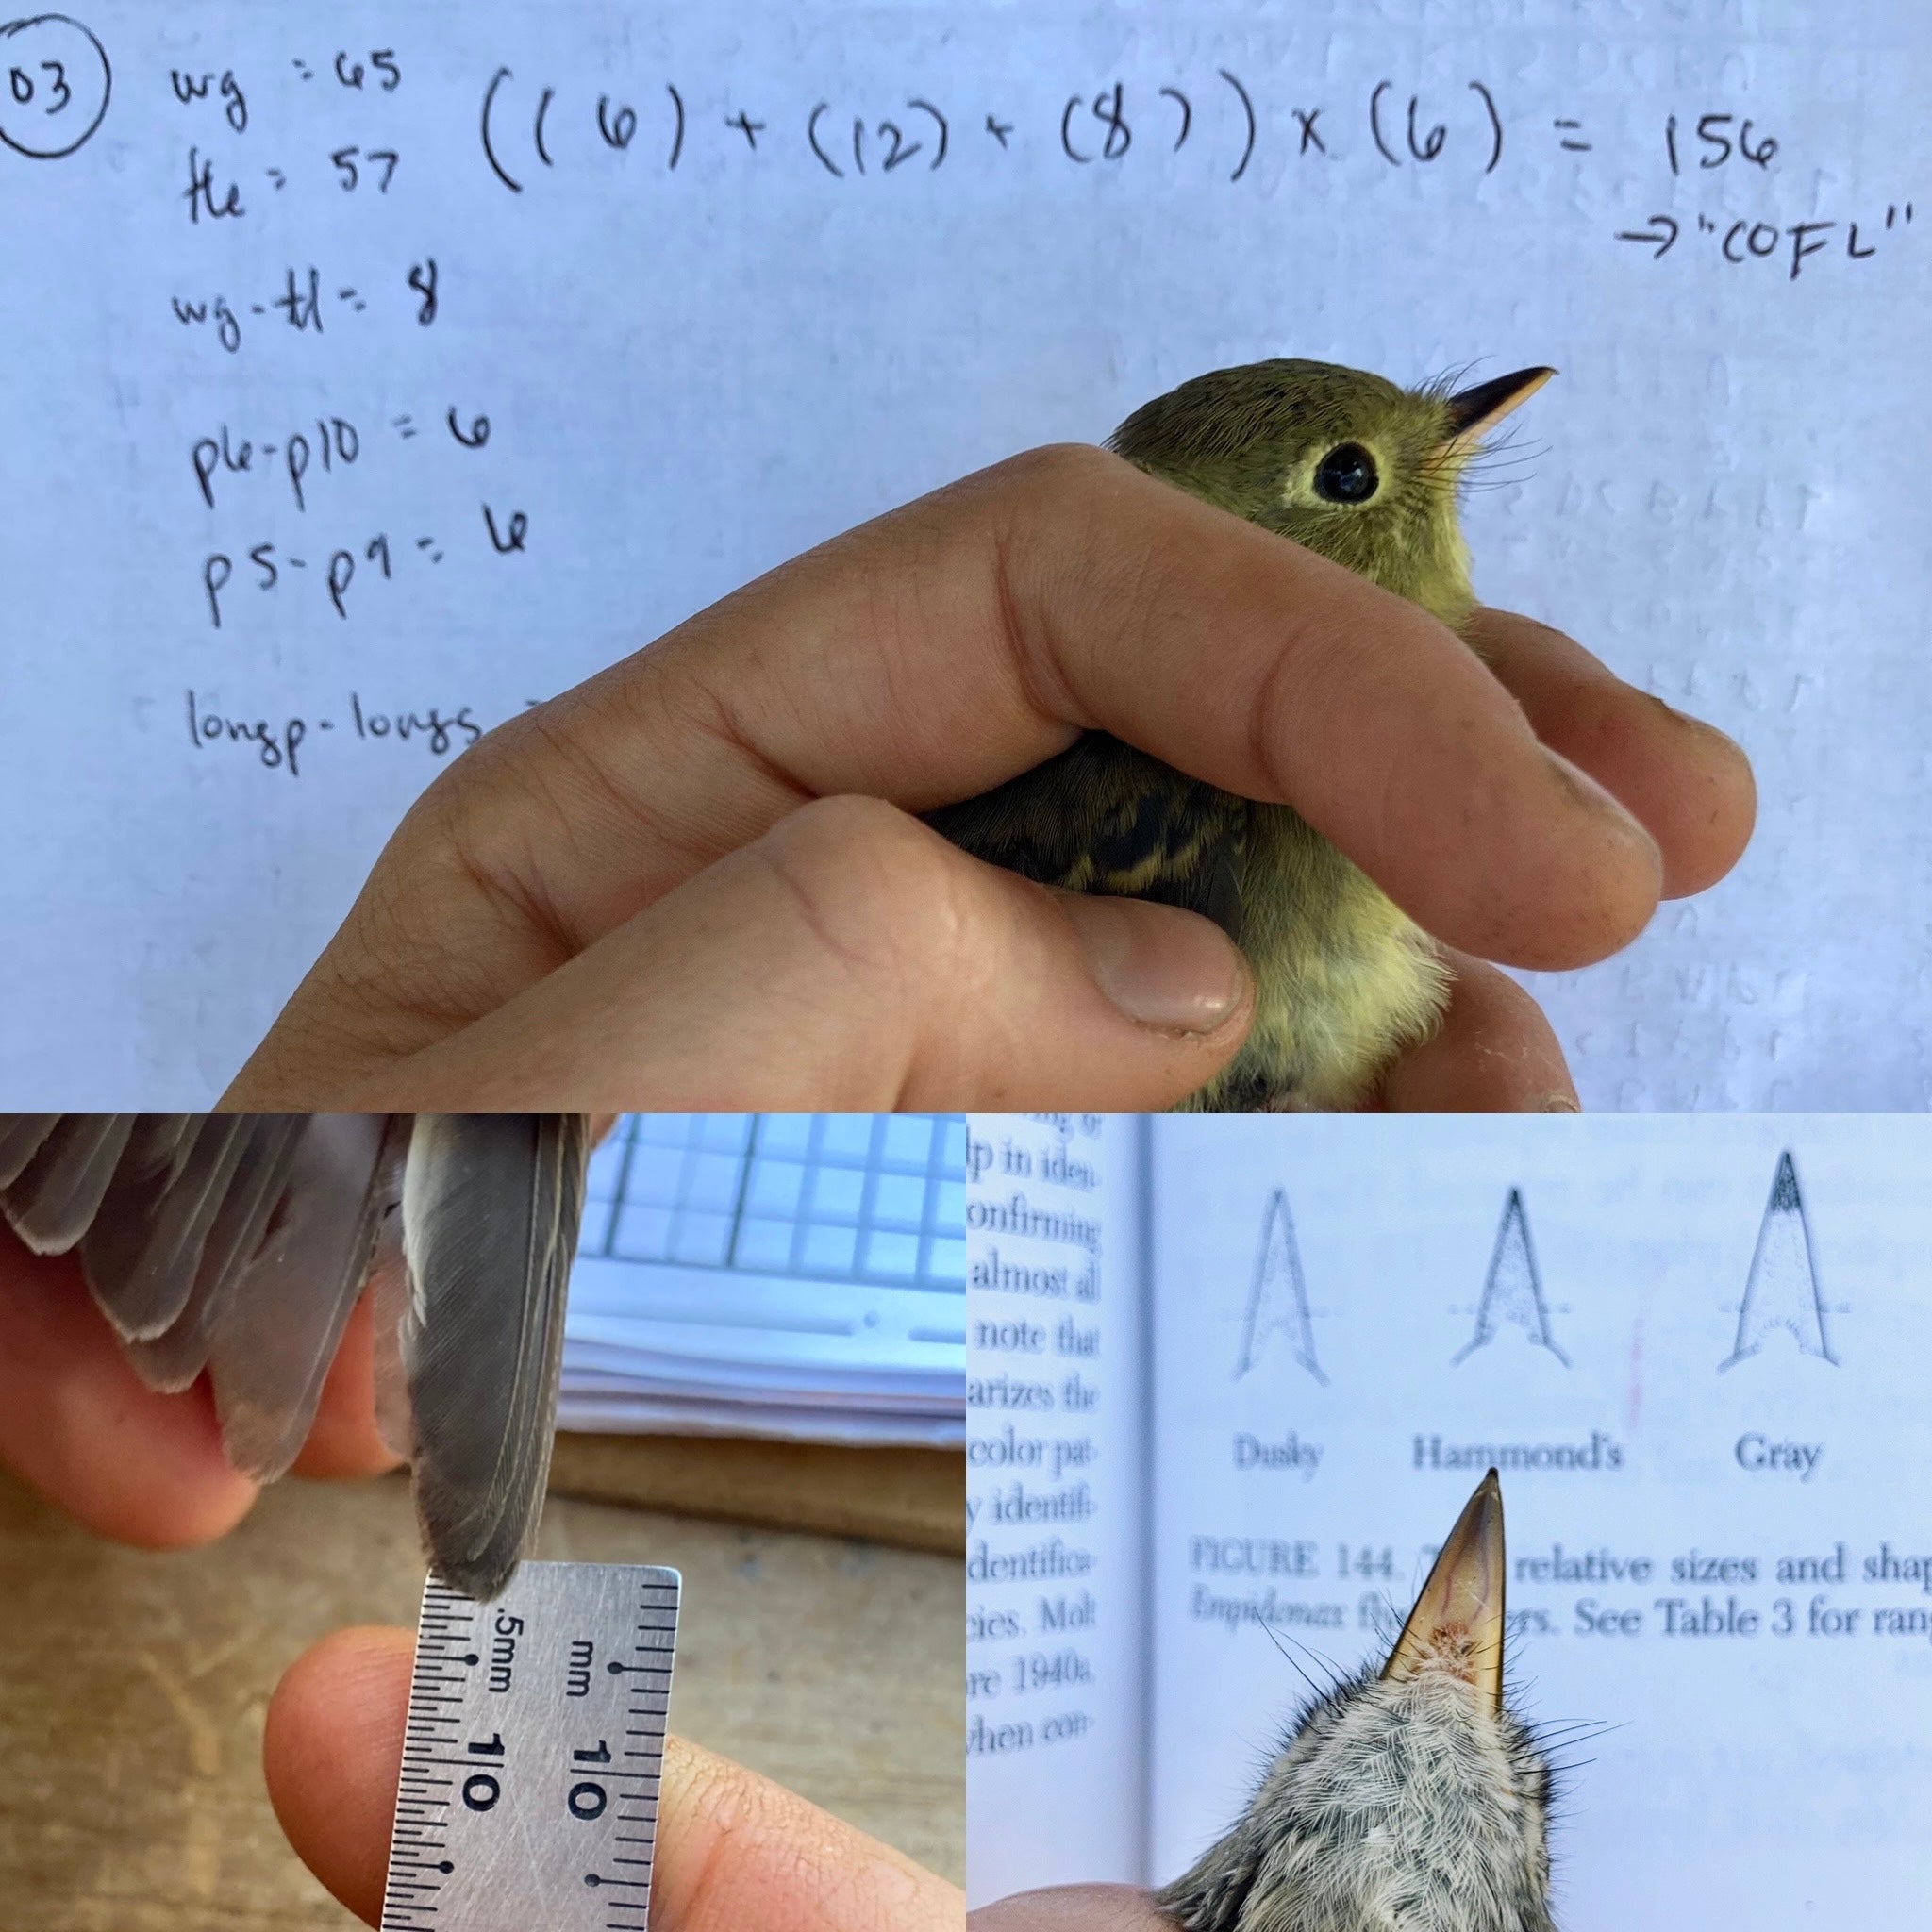 collage of 3 images shows a western flycatcher held in front of a data sheet featuring a handwritten equation, a ruler held up to the folded wing feathers of a flycatcher, and a gray flycatcher beak held up next to a field guide image of flycatcher beaks